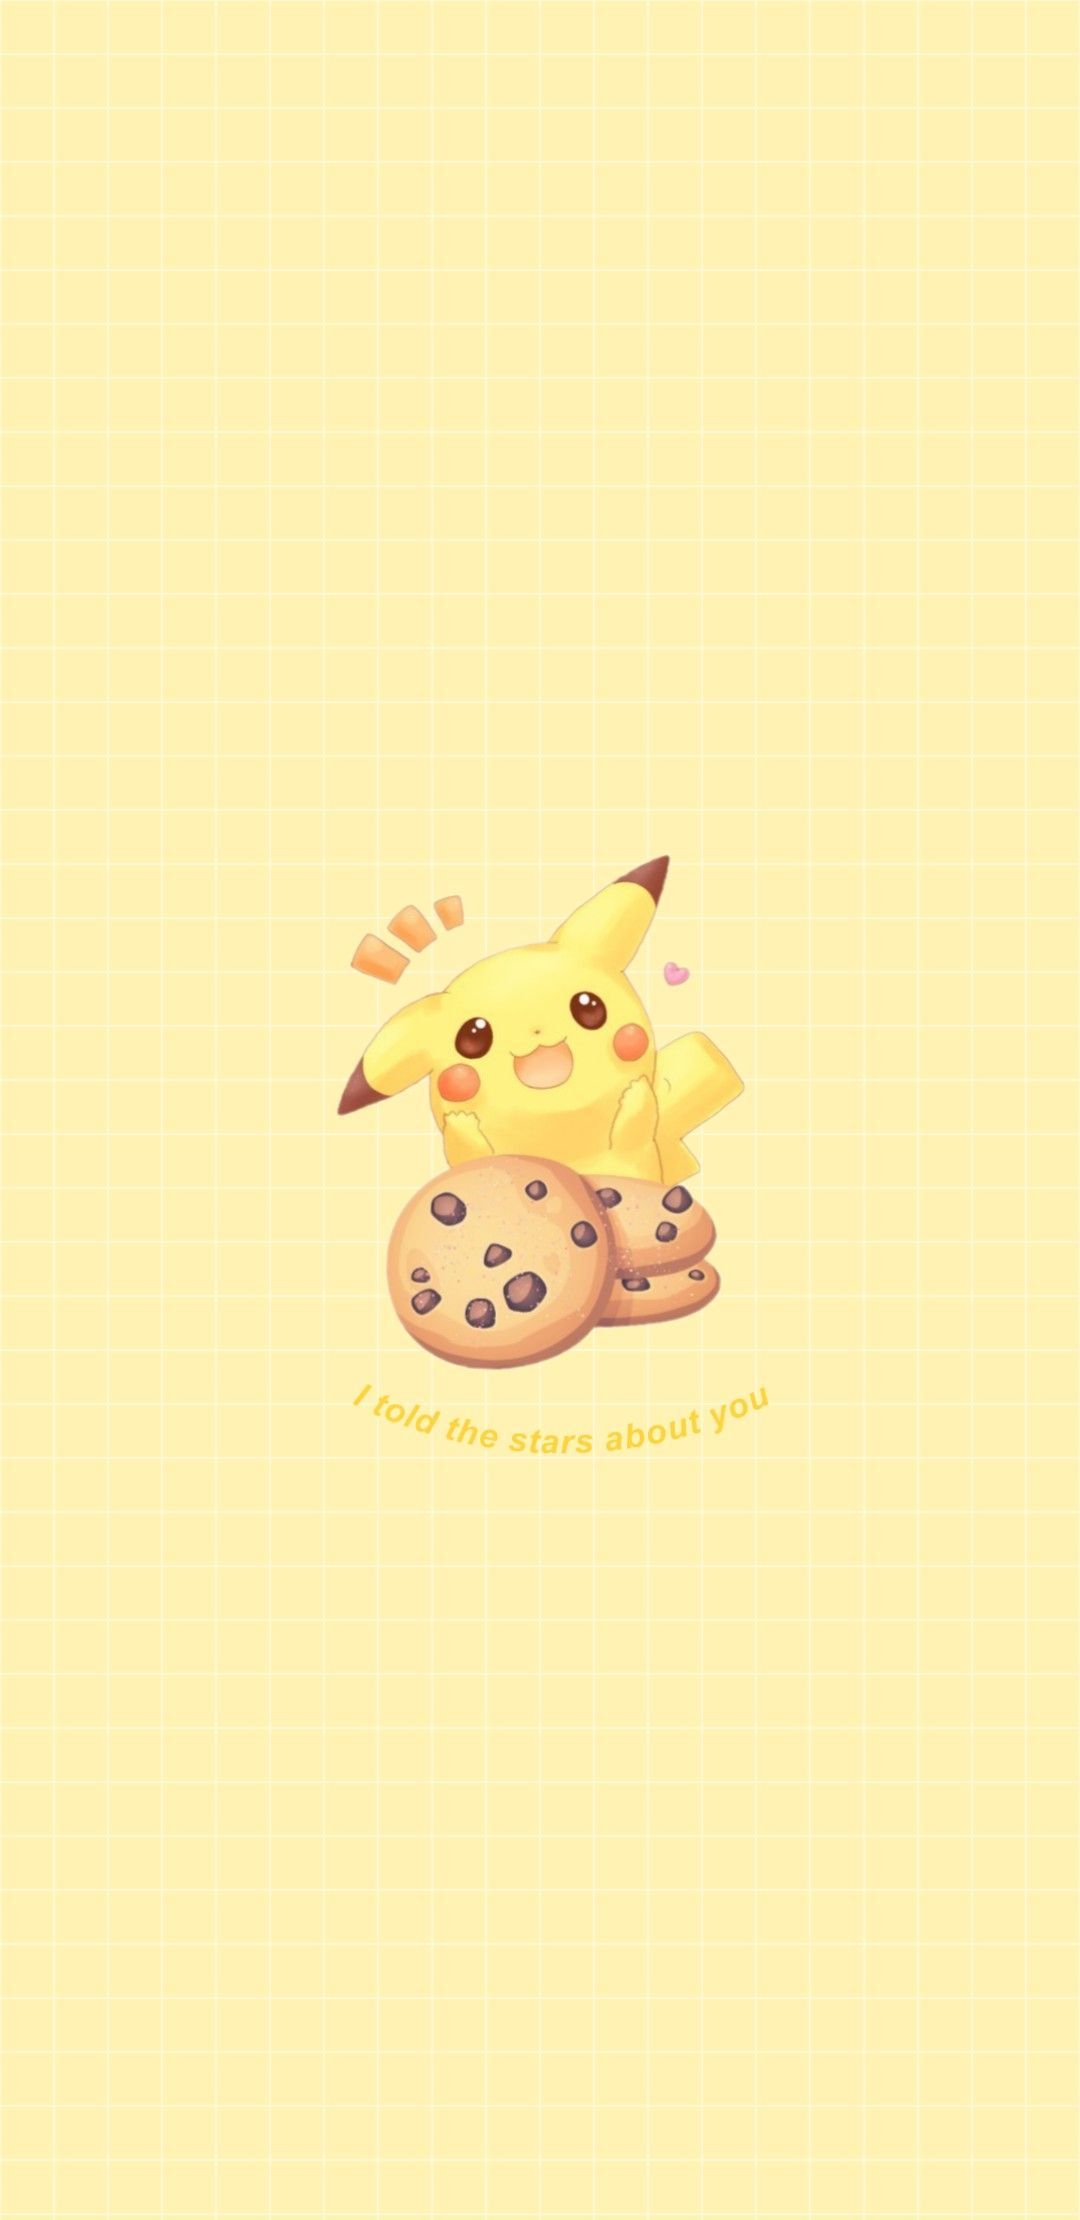 Free download Pikachu Yellow Wallpaper iPhone 11 3D Case XPEREN [1280x1280] for your Desktop, Mobile & Tablet. Explore Pikachu Yellow Wallpaper. Pokemon Pikachu Wallpaper, Pikachu Wallpaper, Pokemon Wallpaper Pikachu